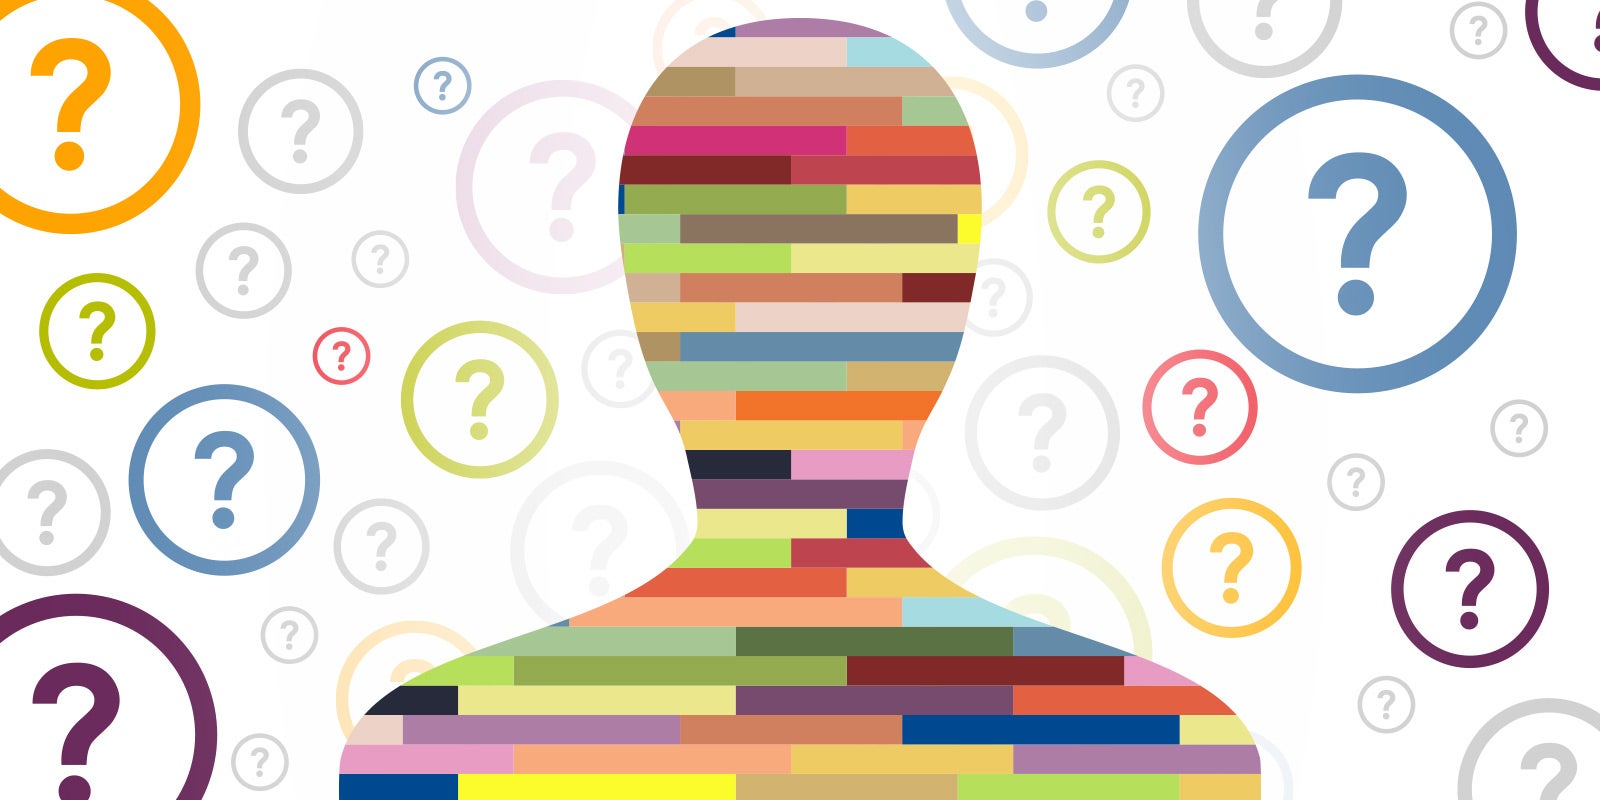 question marks surround a shaded head and upper body of a person filled in with bands of different colors to showcase this blog is about how to use personality tests in the workplace